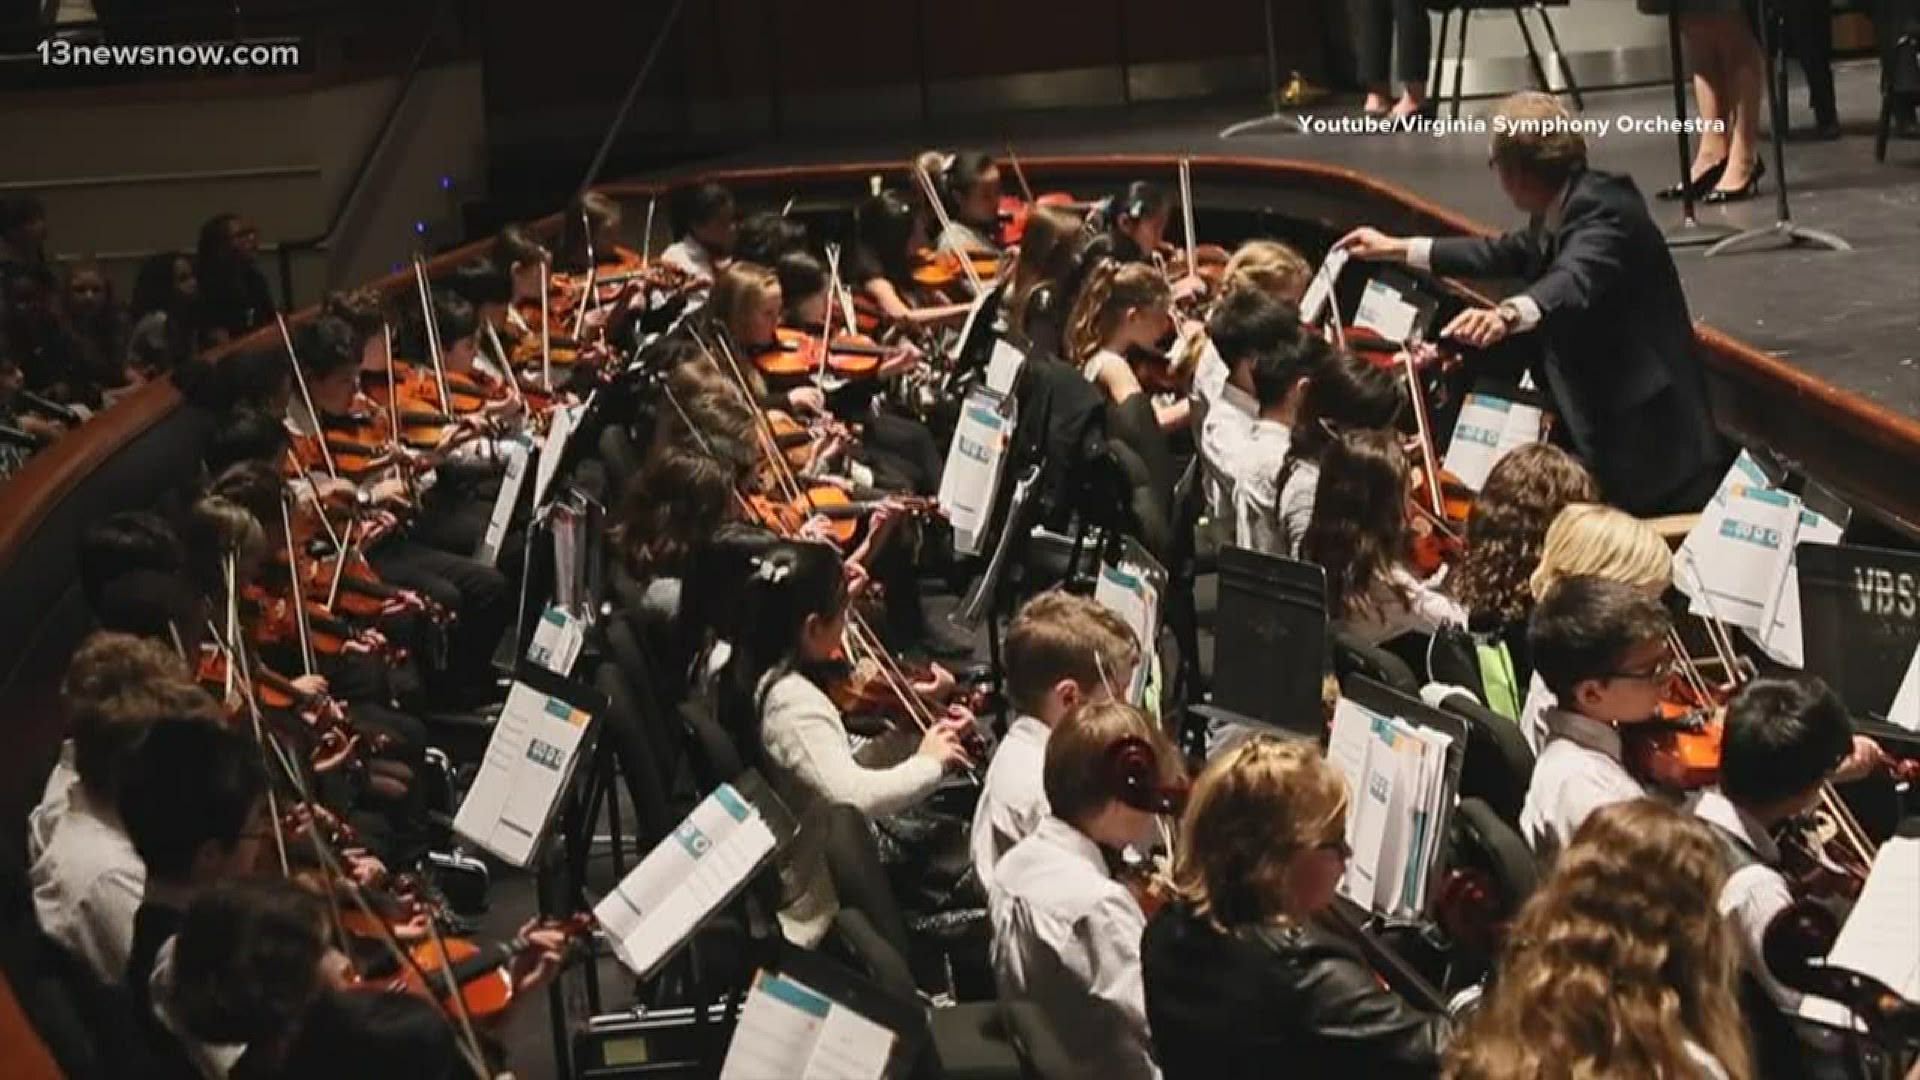 The Virginia Symphony Orchestra, approaching its 100th season, is still inspiring others in a period of self-isolation.